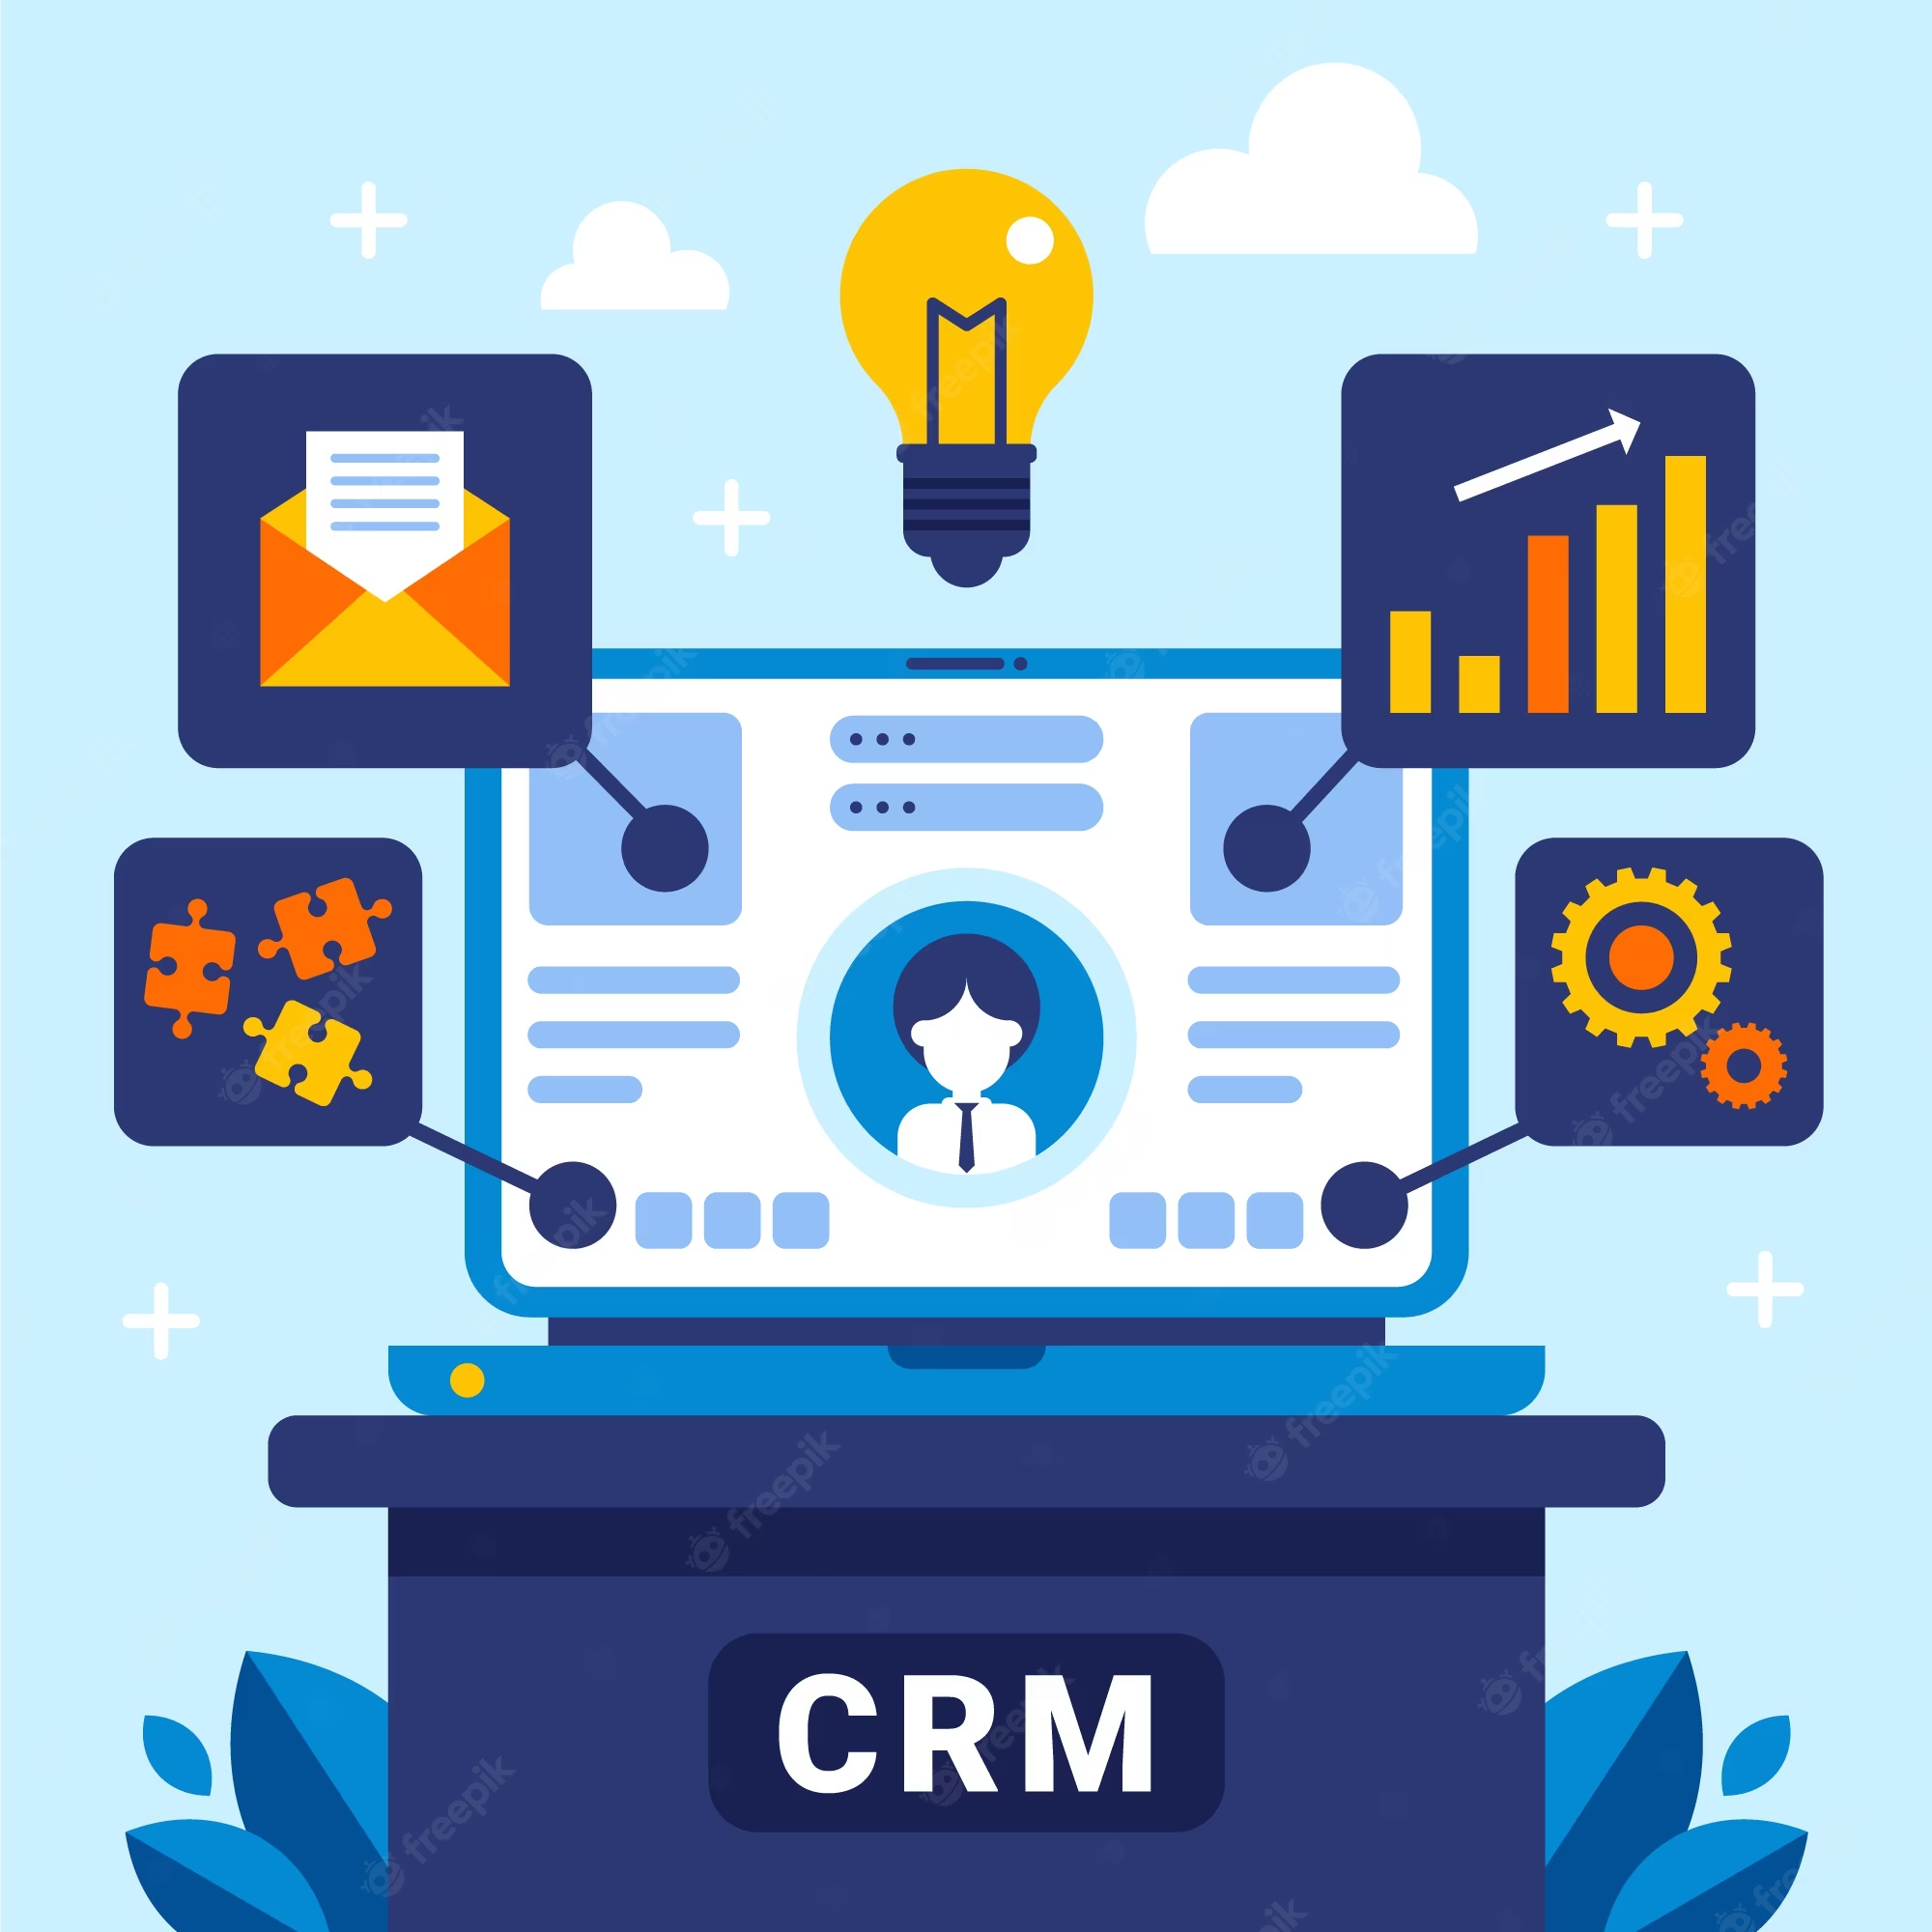 Being success with CRM